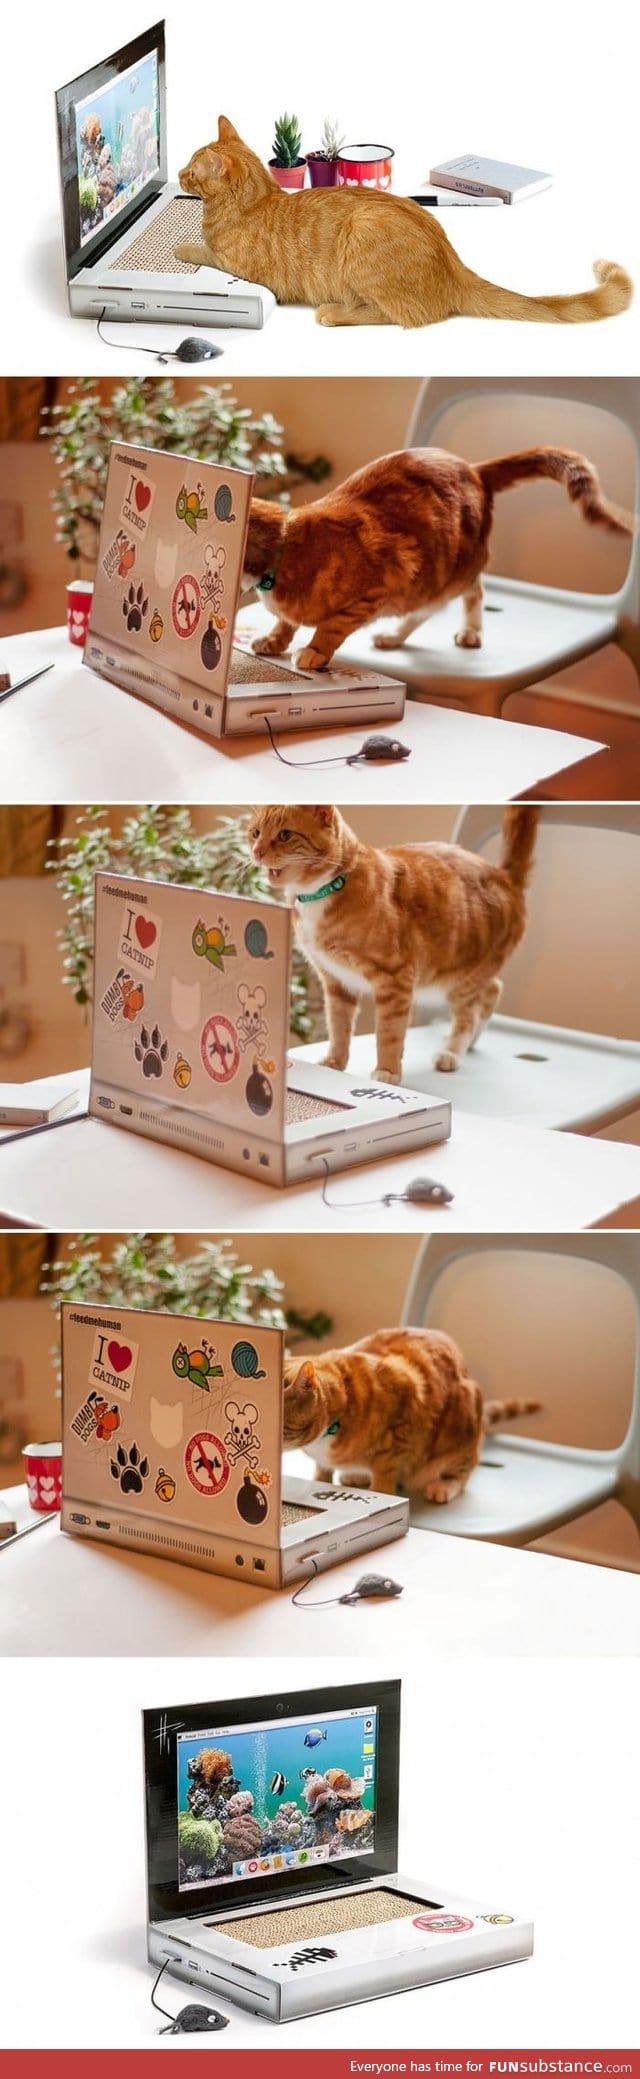 A Laptop For Your Cat So It Won't Destroy Yours Or Your Work